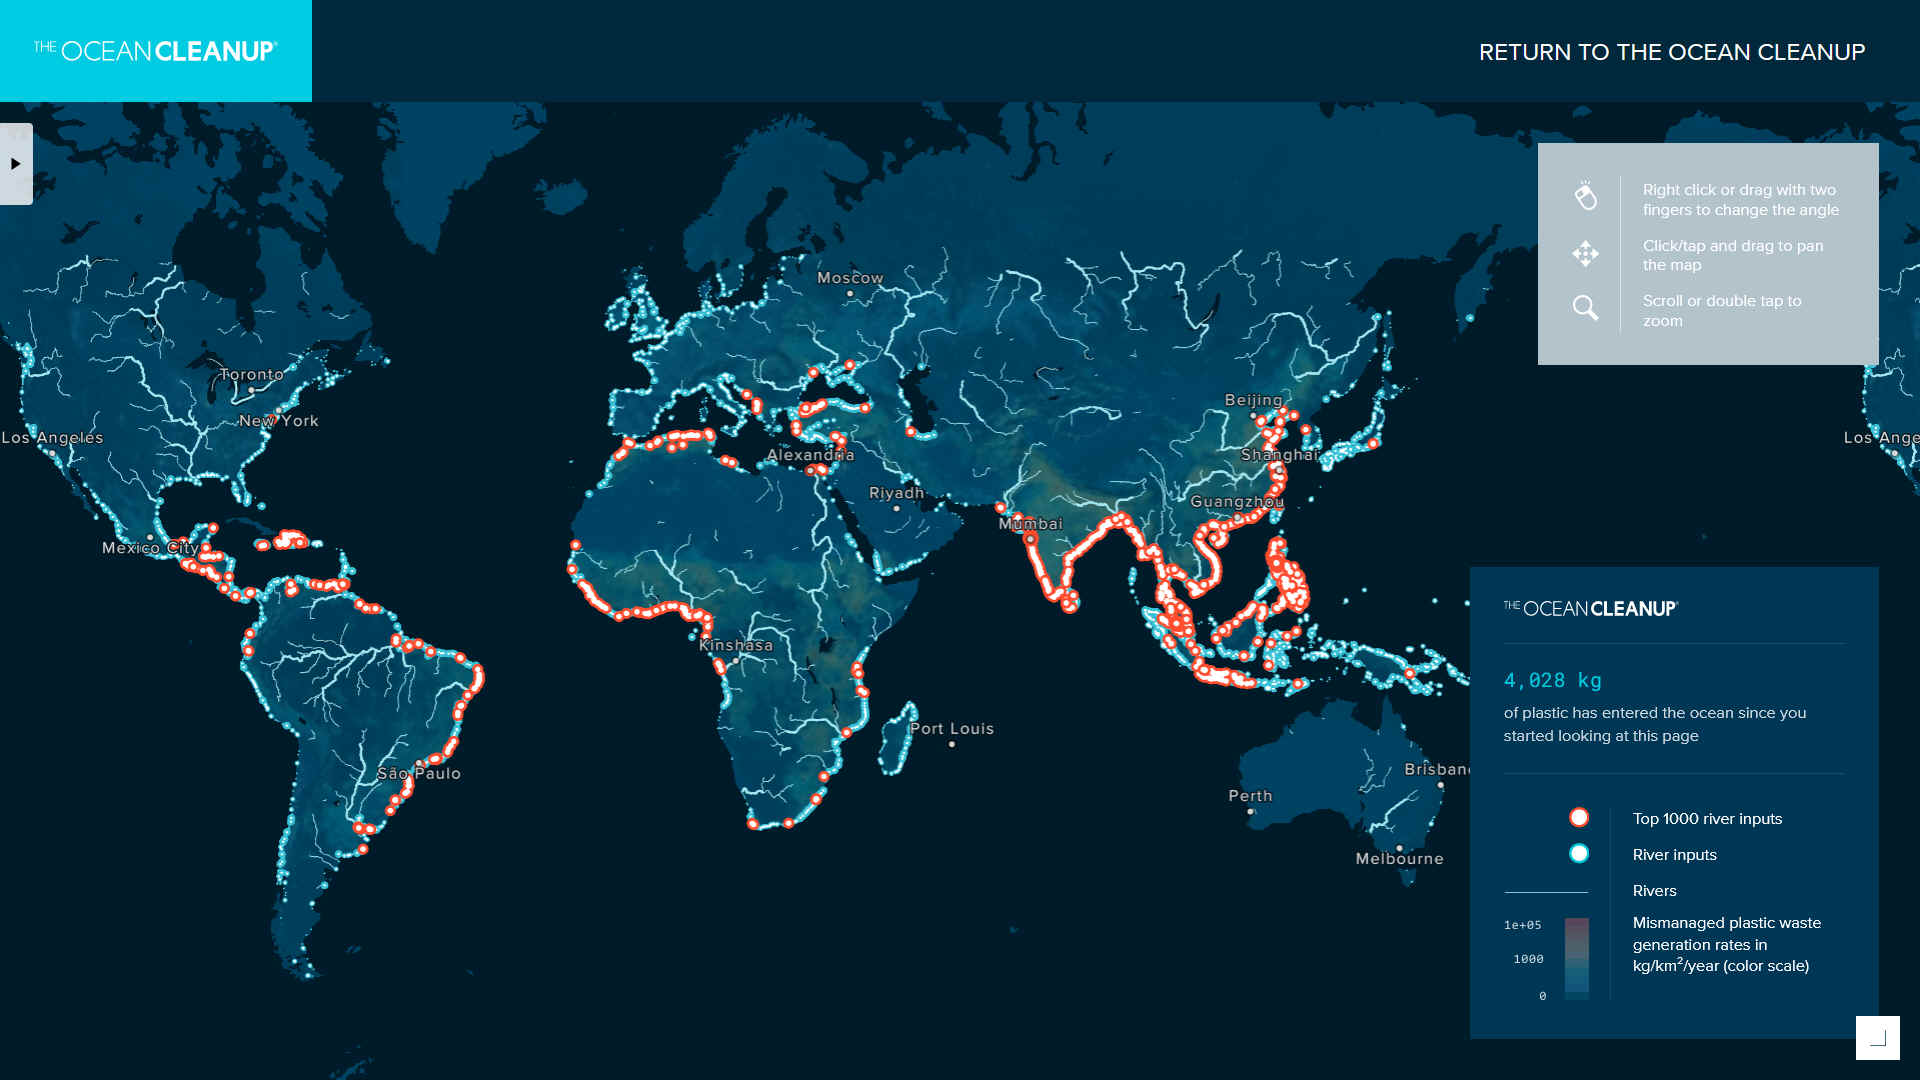 Rivers are a major source of plastic waste in the oceans. We estimate that 1000 rivers, represented by the red dots, are accountable for nearly 80% of global annual riverine plastic emissions, which range between 0.8  2.7 million metric tons per year, with small urban rivers amongst the most polluting. The remaining 20% of plastic emissions are distributed over 30,000 rivers, represented by smaller blue dots.